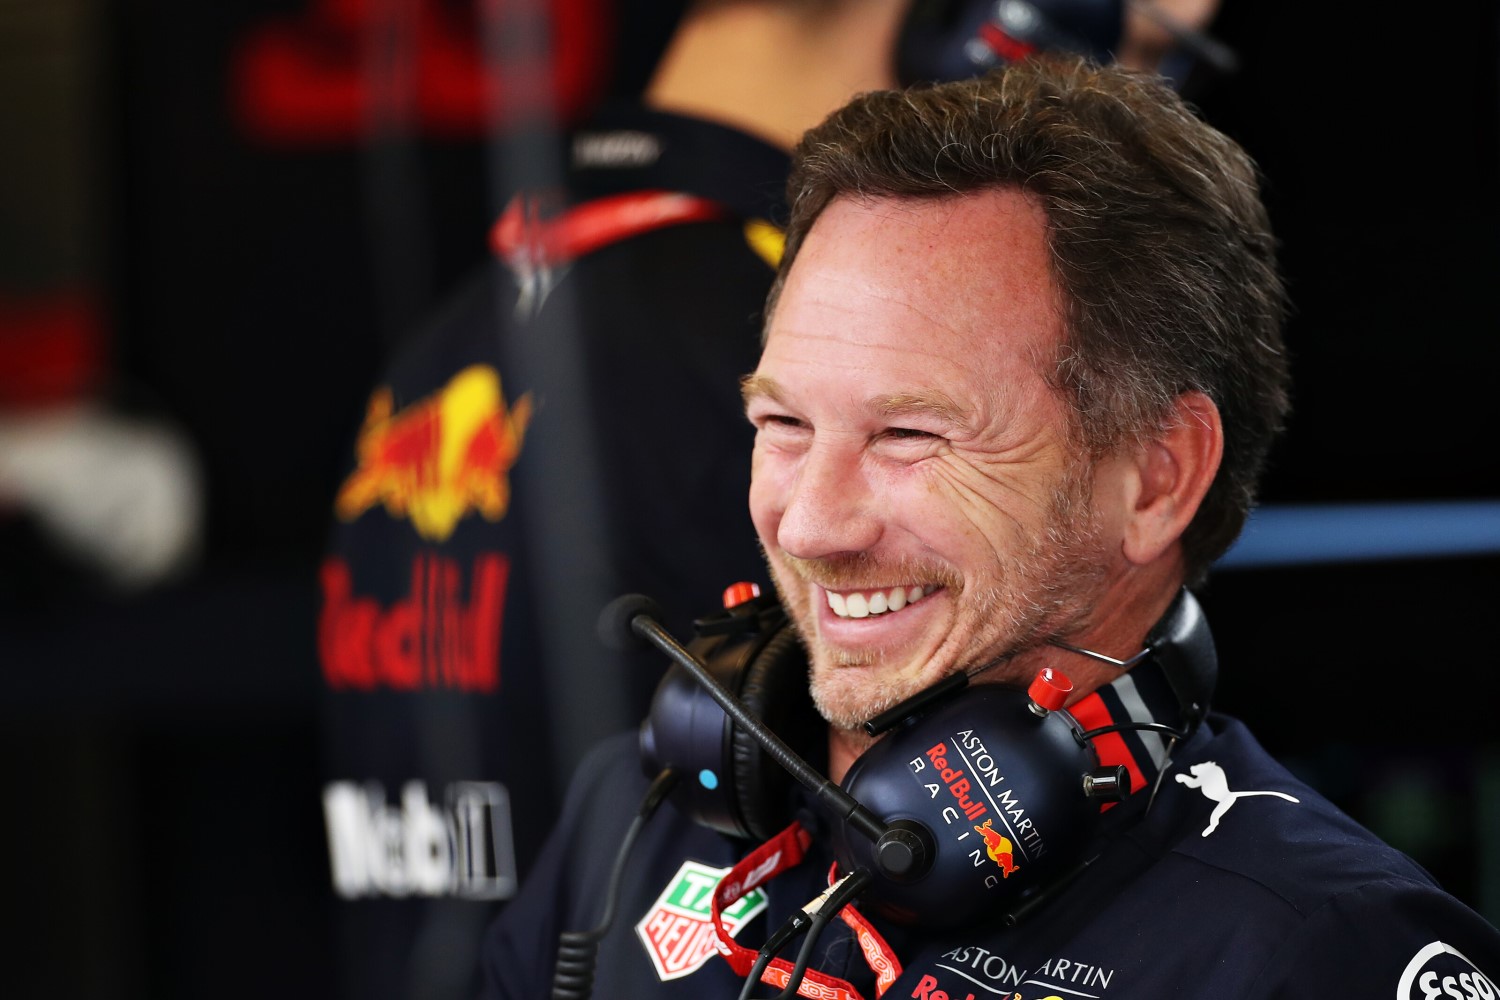 Christian Horner laughs at idea teams will give up motorhomes